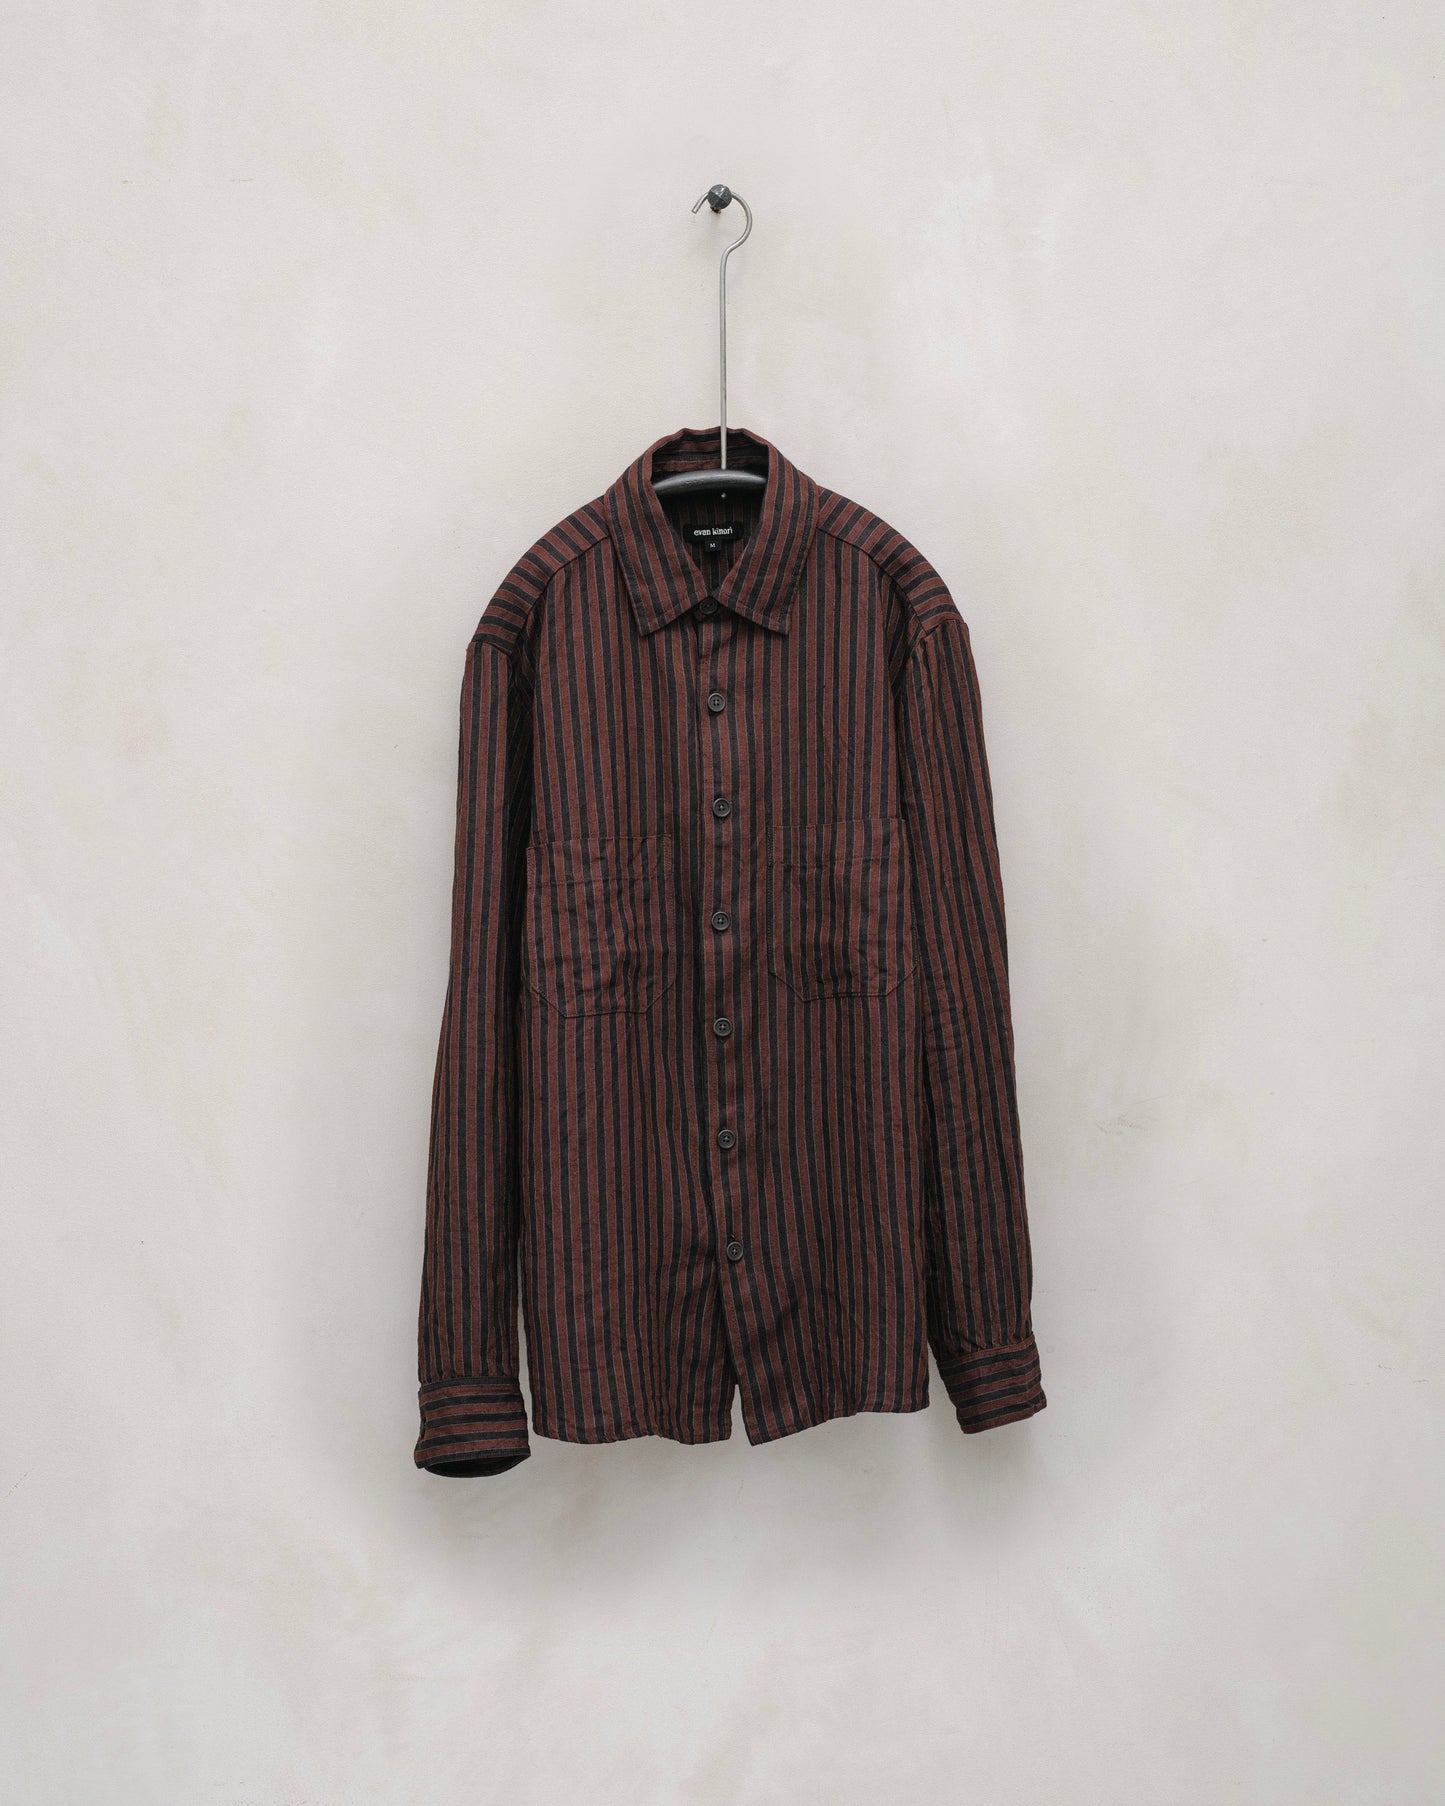 Two Pocket Shirt - Yarn Dyed Linen Stripe, Navy/Red